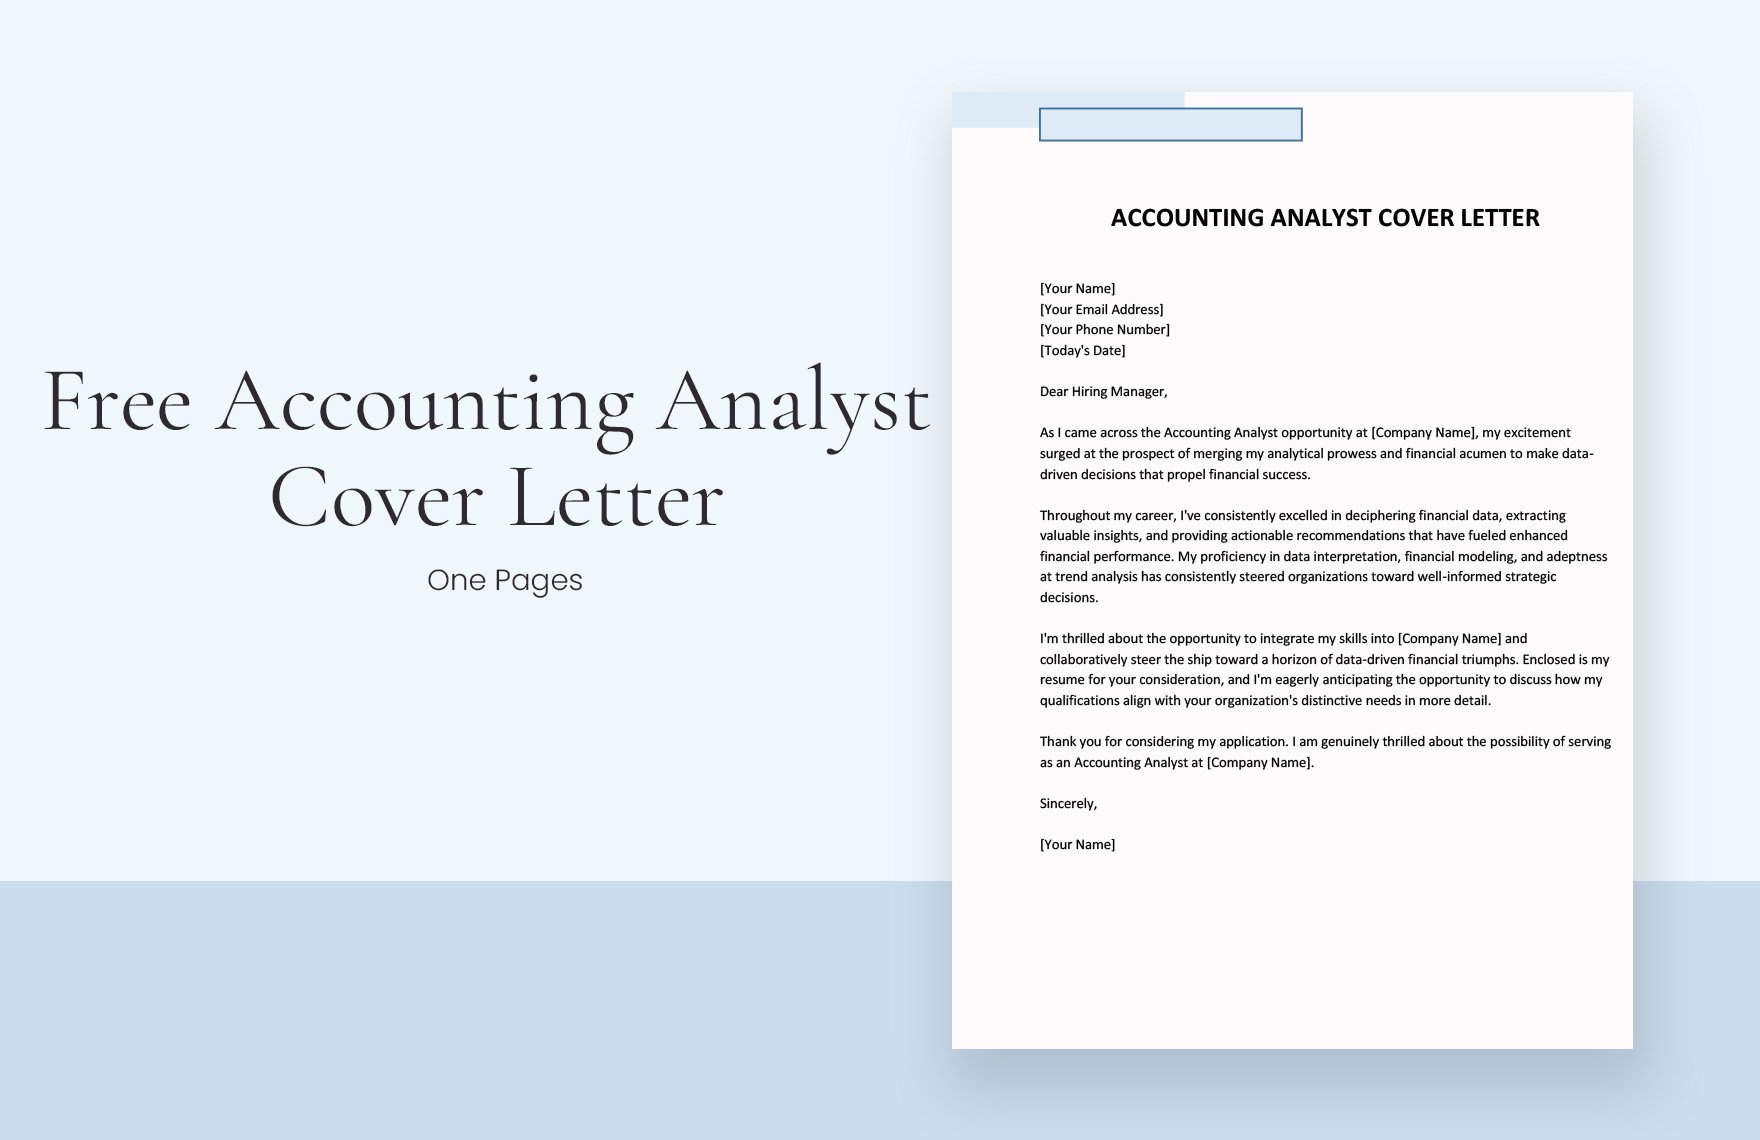 Accounting Analyst Cover Letter